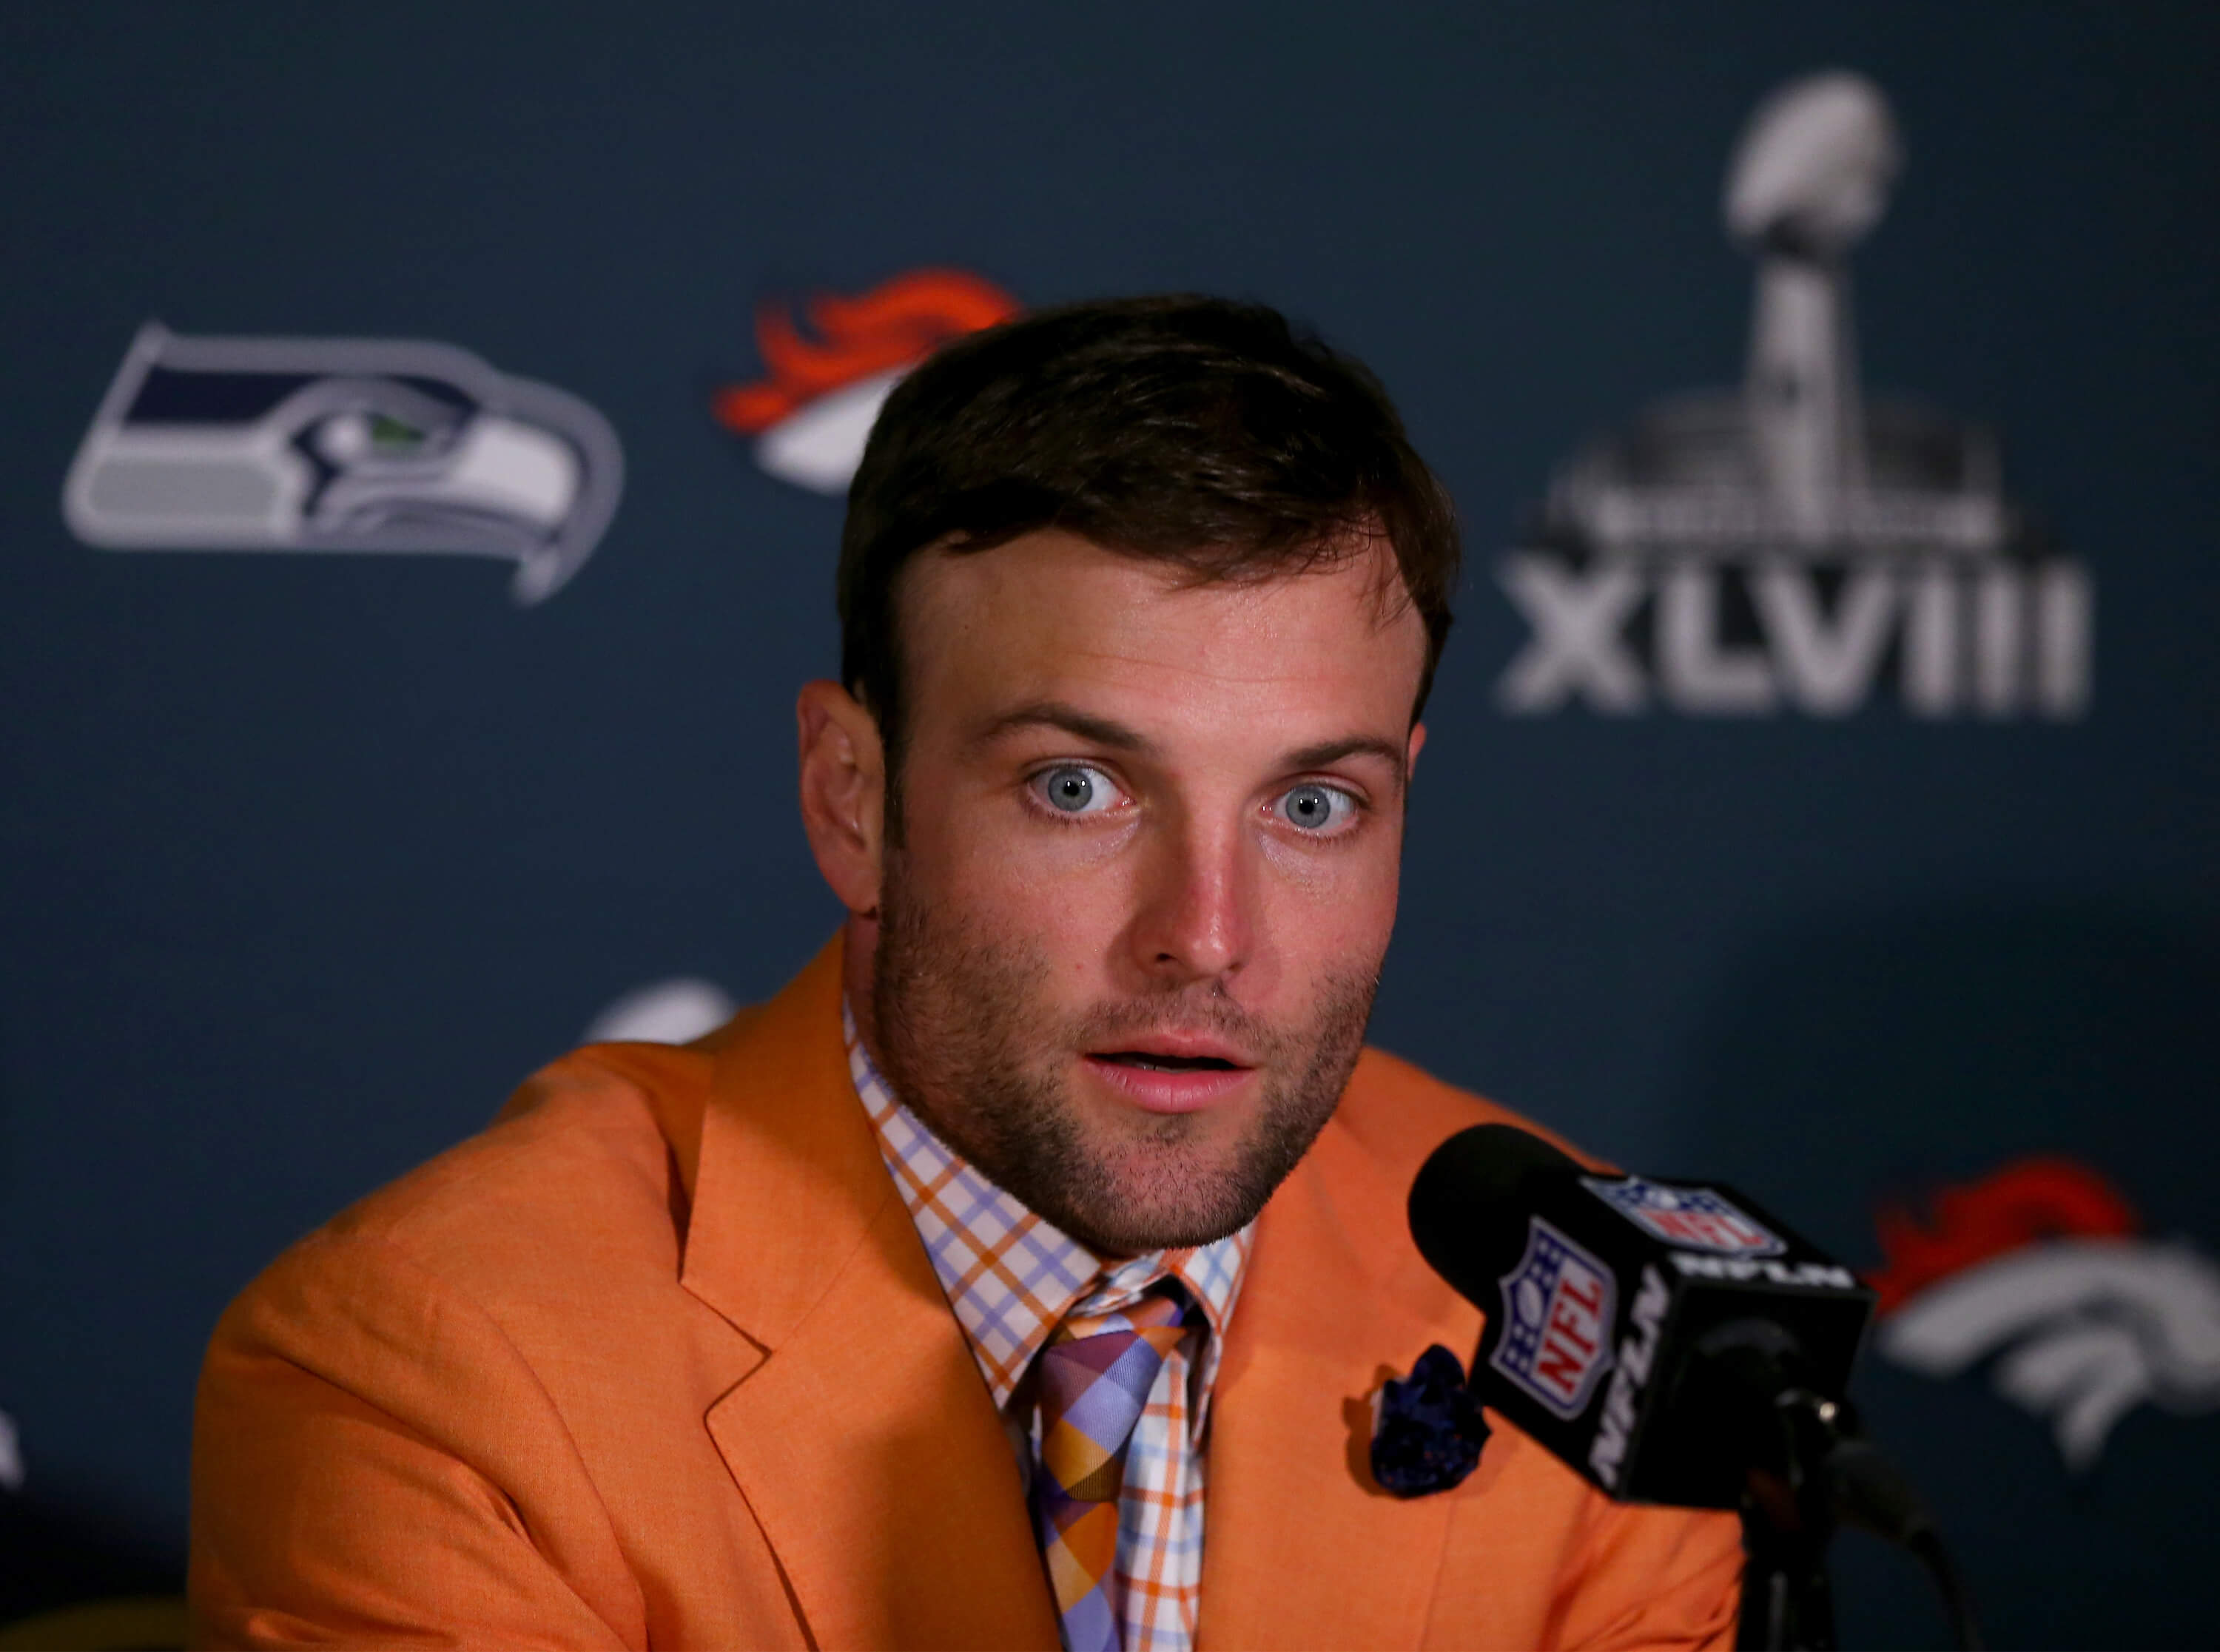 Wes Welker’s new job on Monday nights include diaper duty